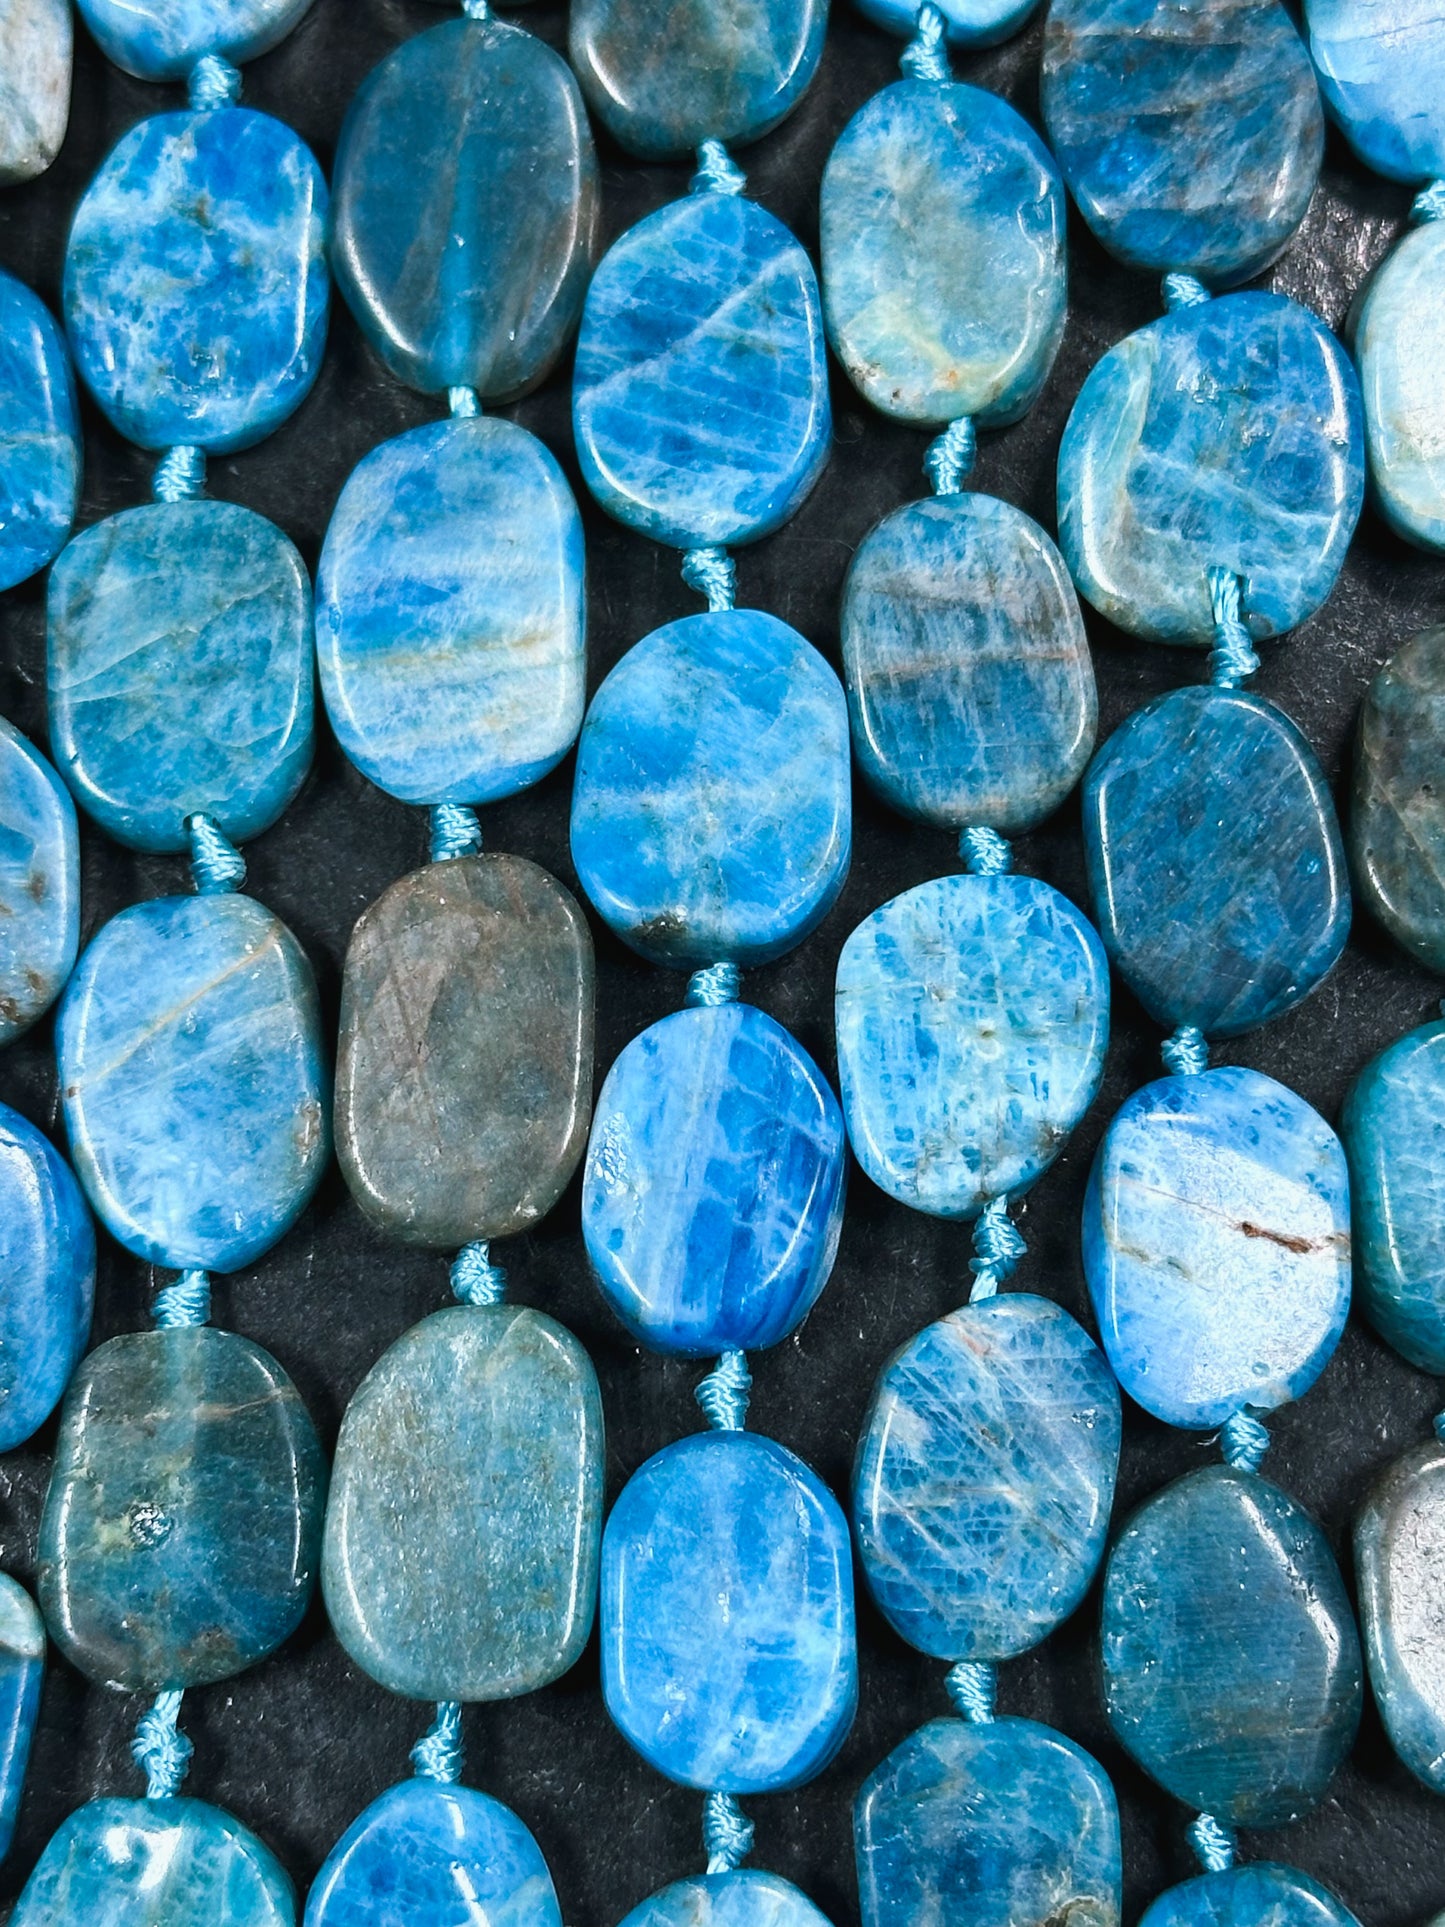 AAA Natural Apatite Gemstone Bead 16x11mm Oval Tablet Shape Bead, Beautiful Natural Blue Color Apatite Beads Excellent Quality 15.5" Strand